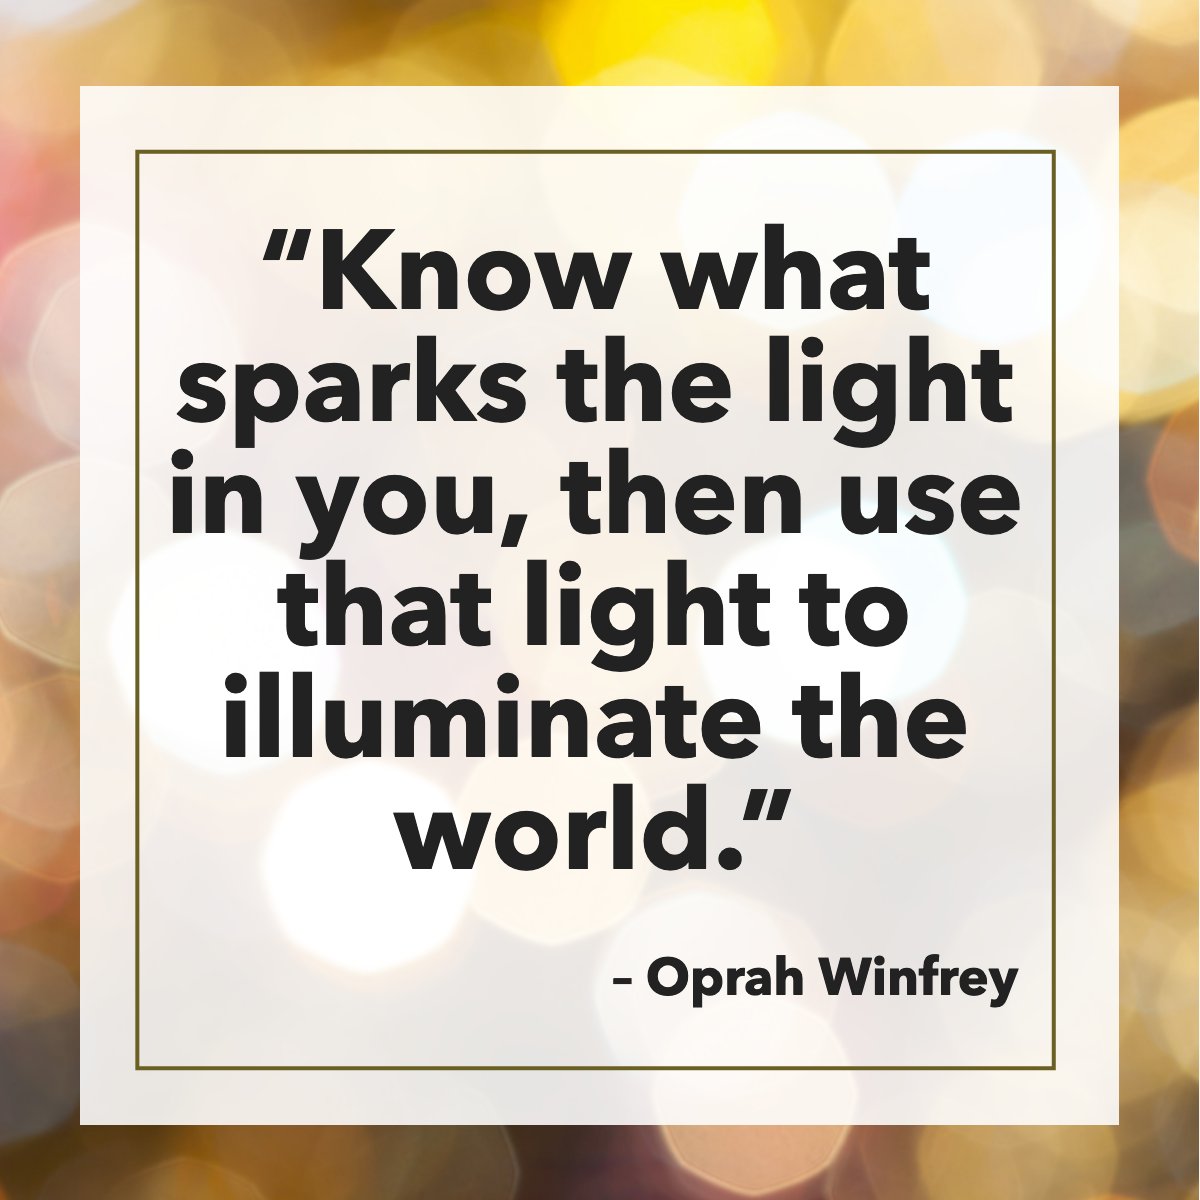 It's always important to know the things that make you feel better

#quotegram #quoteoftheday✏️ #oprahwinfrey  #dreams💭 

 #RiversideRealestate #RiversideHomes #RiversideBroker #JamesCottrell #jamesforhomes